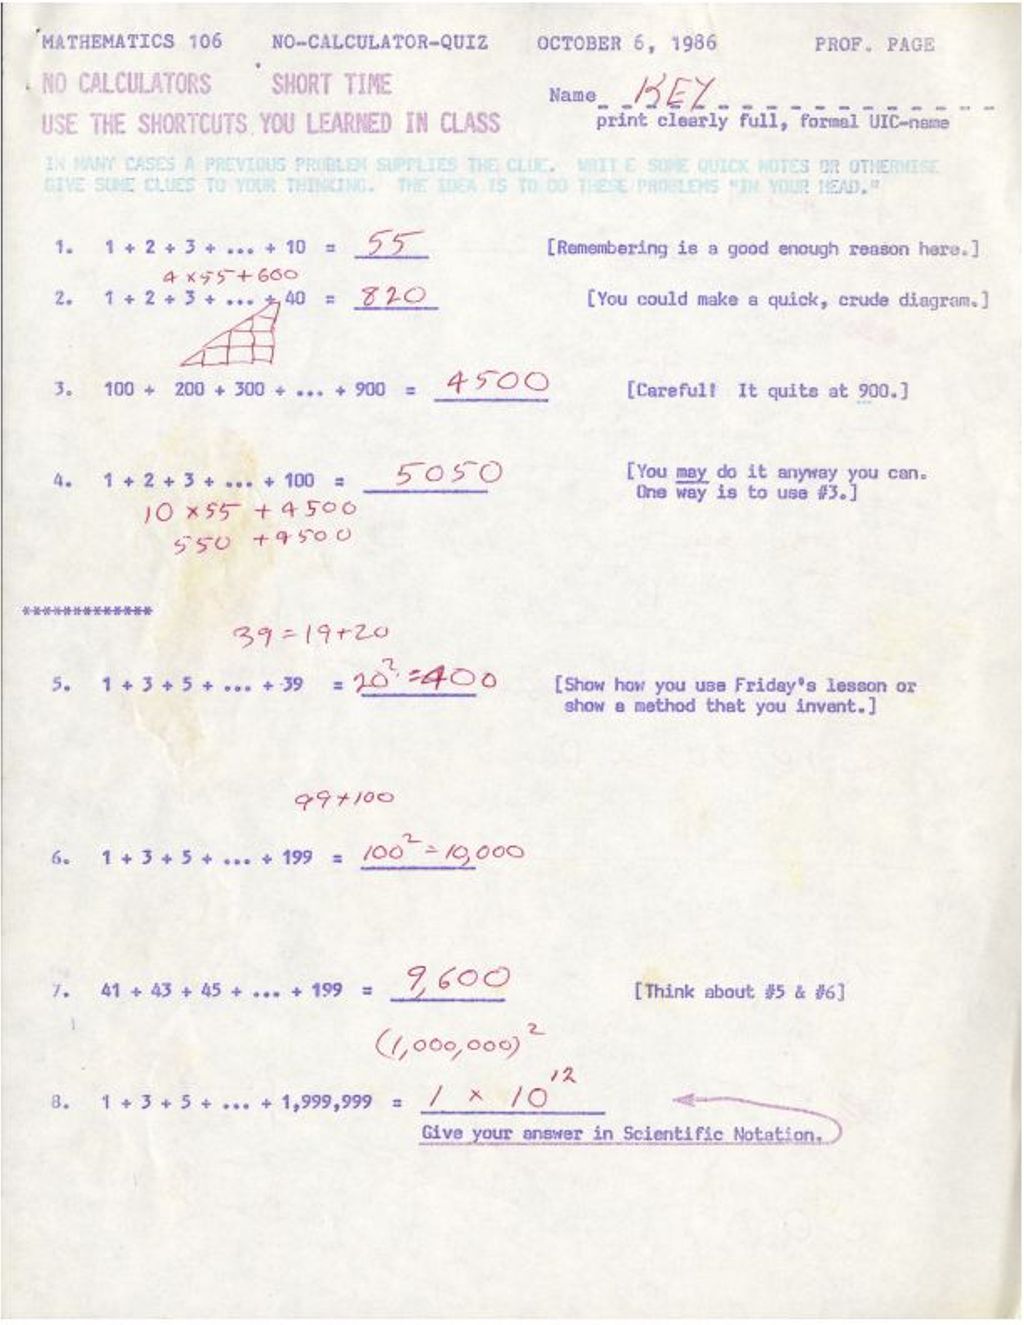 Math 106 No-Cal. Quiz 1986 “Use the shortcuts you learned” 1 + 2 + . . . .10 AK handwritten by DP with multiple copies of the original stapled